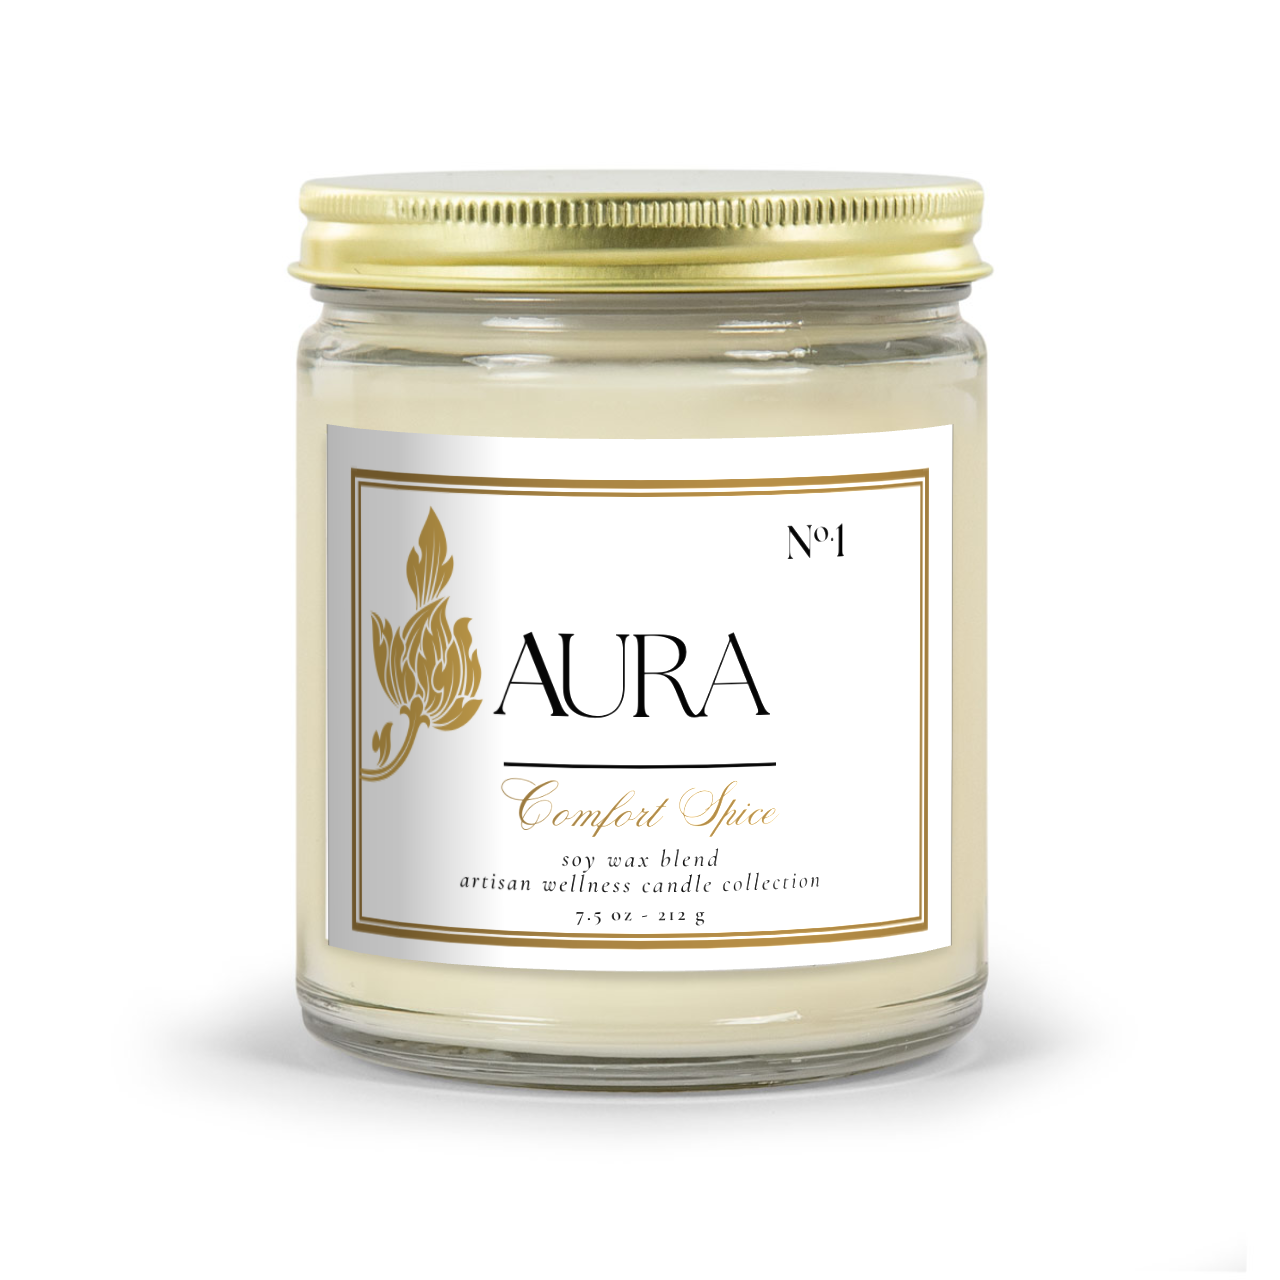 Aromatherapy Candle - Aura Aromas Artisan Wellness Candle Collection:  Classic Amber Or Classic Clear Vessel Comfort Spice Scent